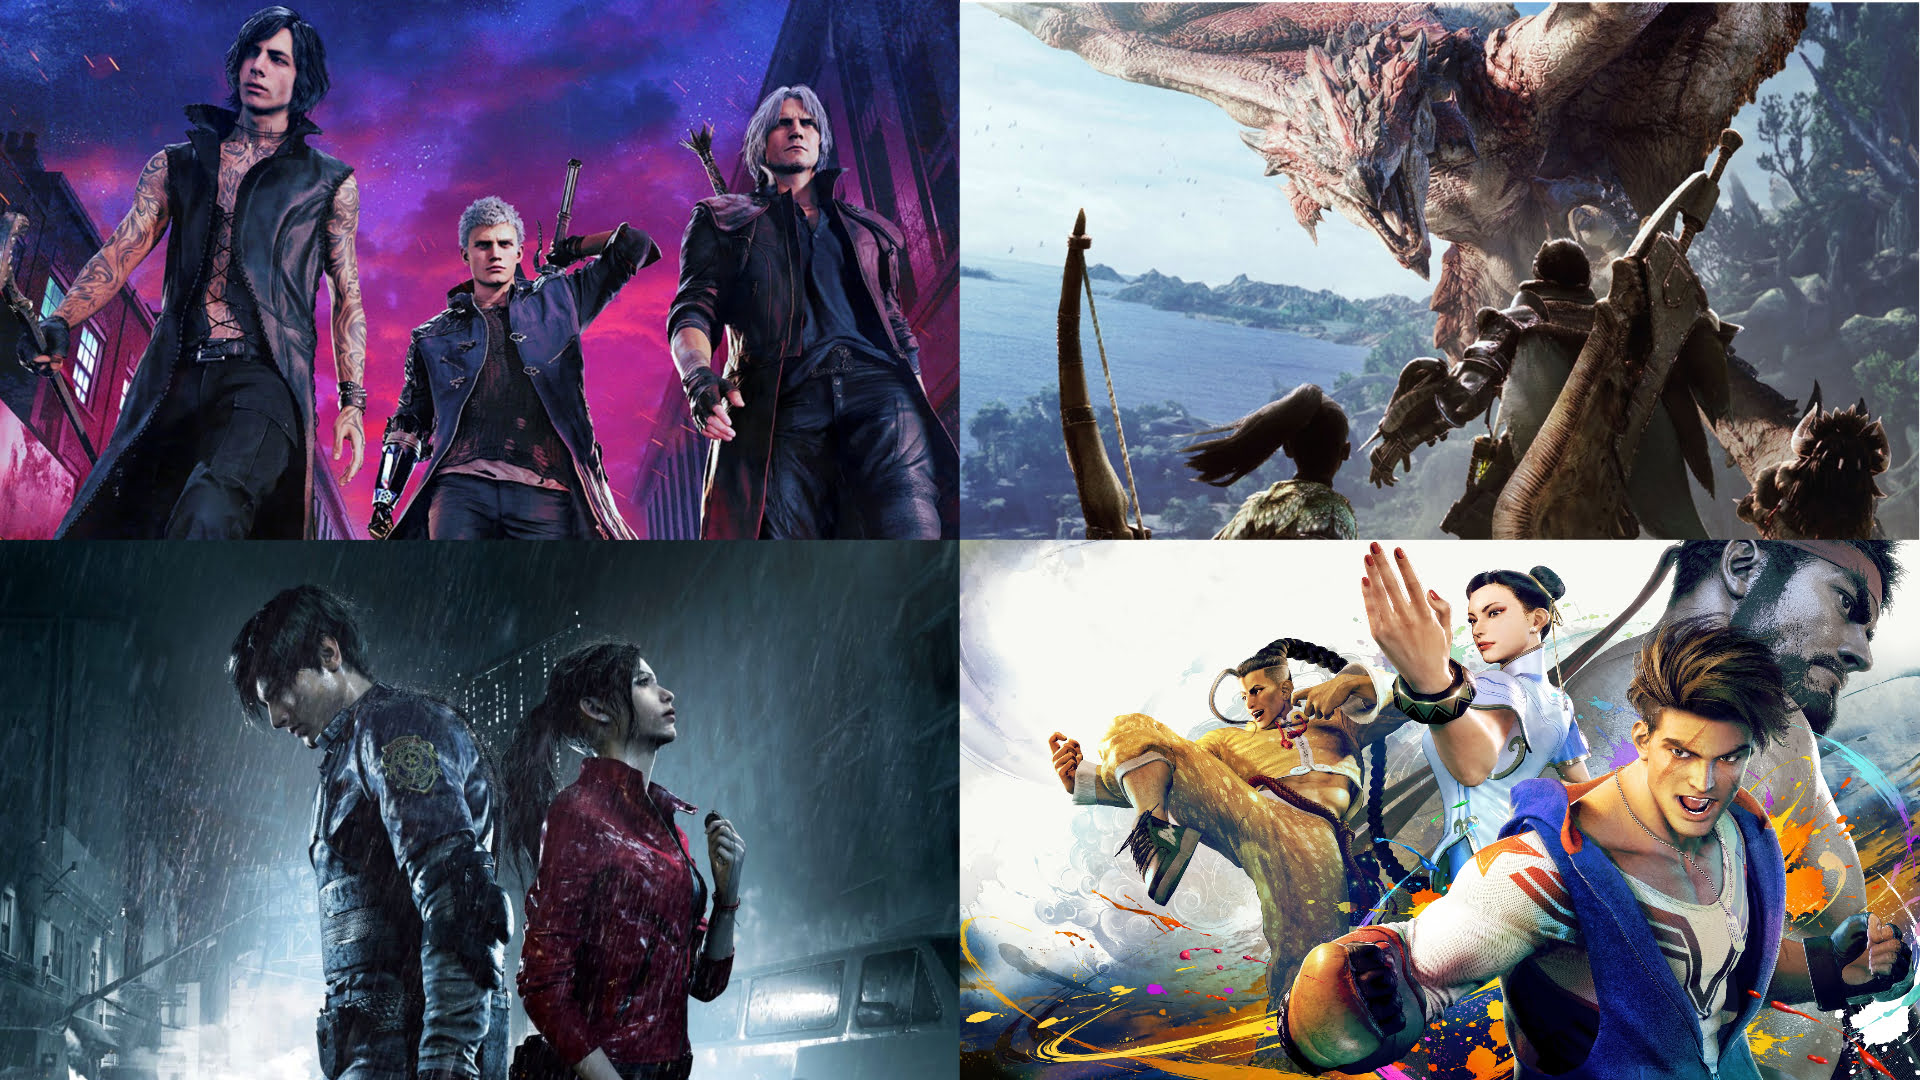 Devil May Cry 5 Special Edition Release Date & New Features - GameWith